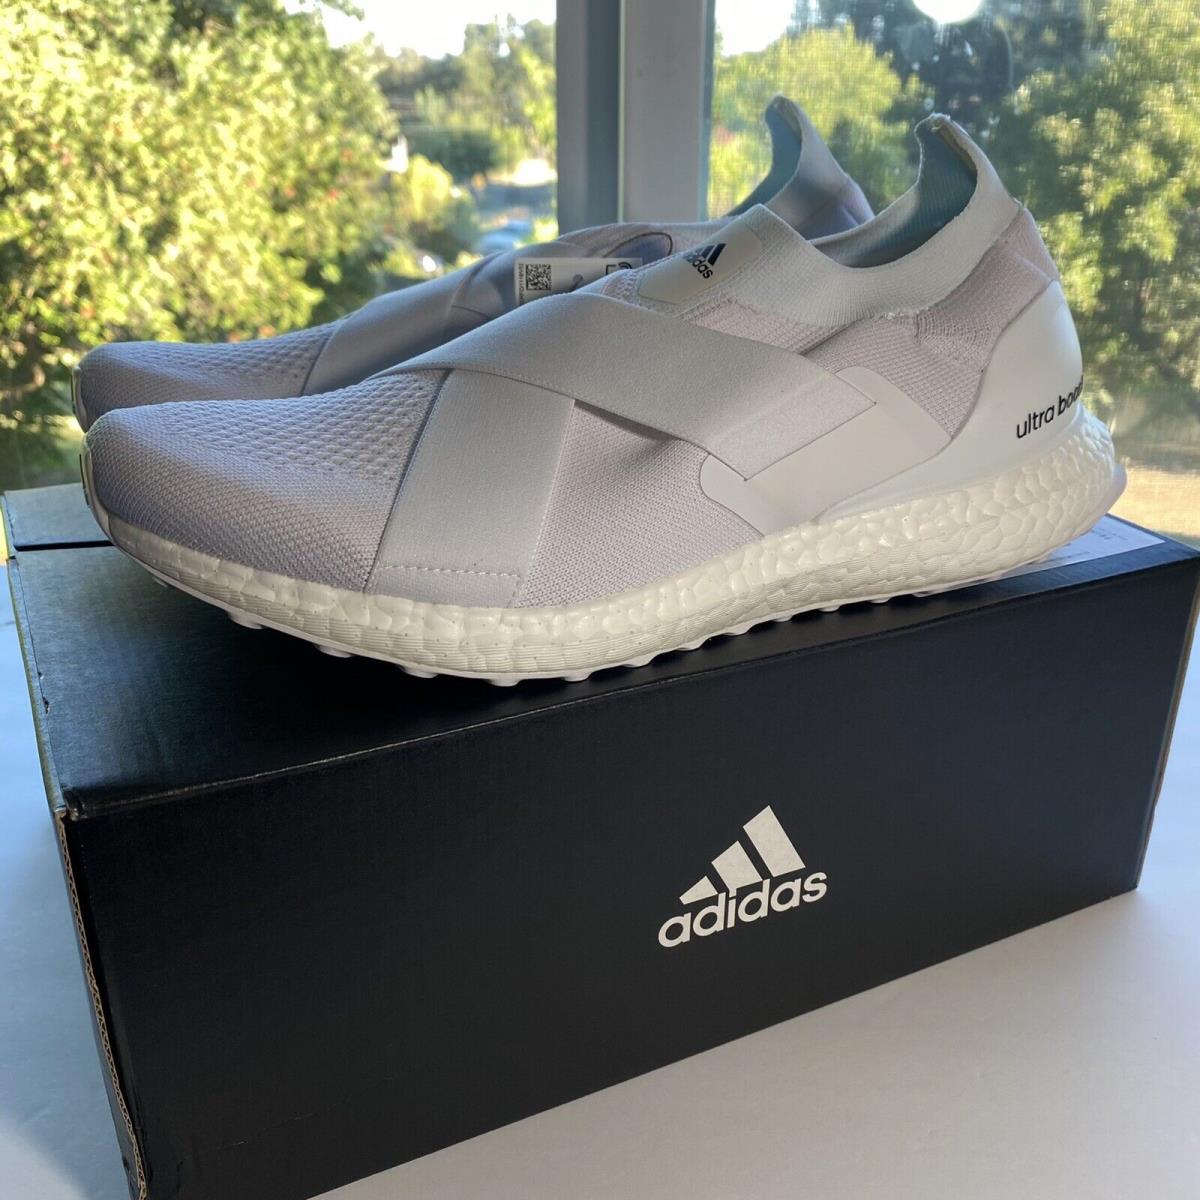 Adidas shoes UltraBoost DNA - White 5